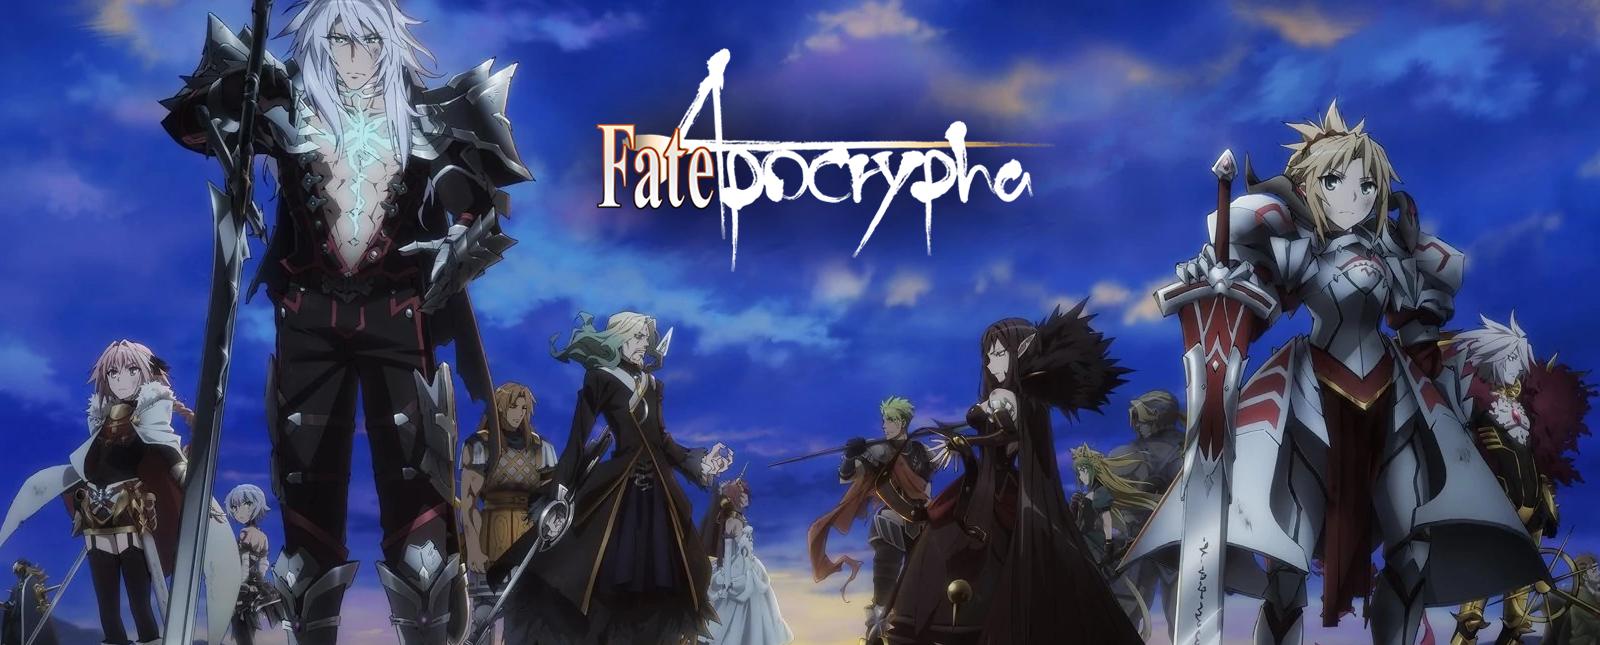 You Can Still Relive The Events Of The Great Holy Grail - Fate Apocrypha Netflix Release Date , HD Wallpaper & Backgrounds